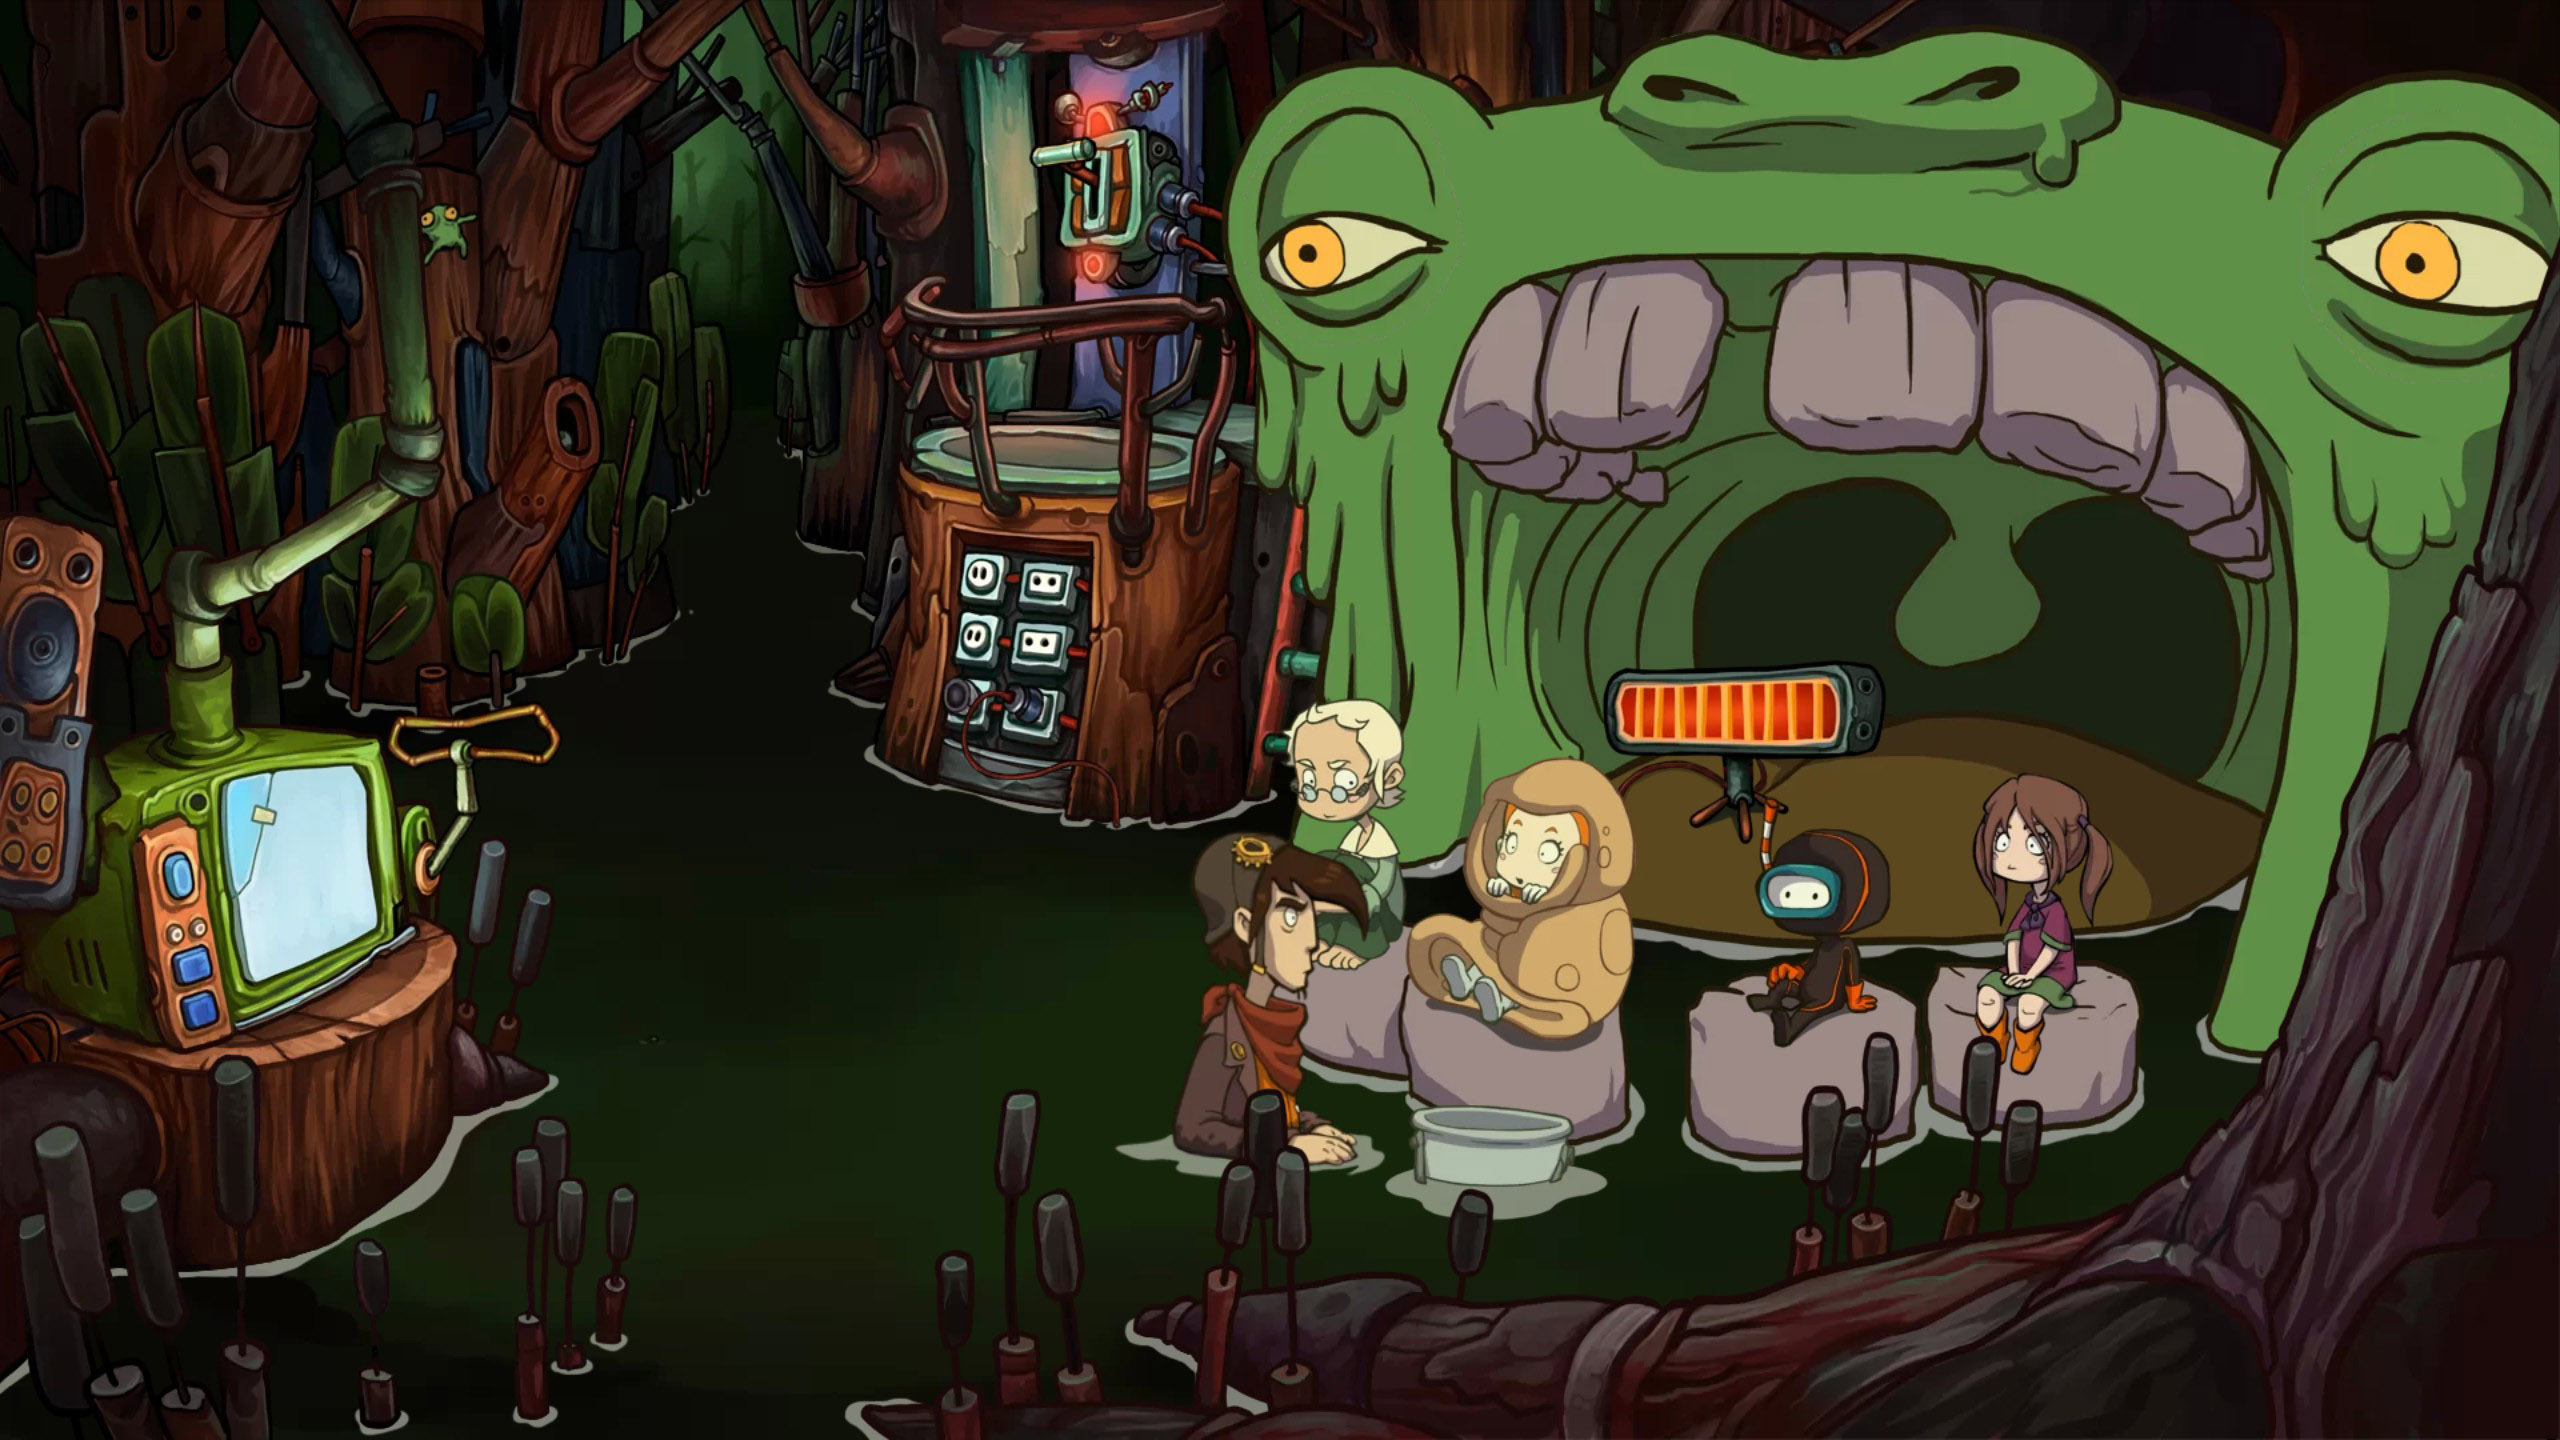 Goodbye Deponia Backgrounds, Compatible - PC, Mobile, Gadgets| 2560x1440 px